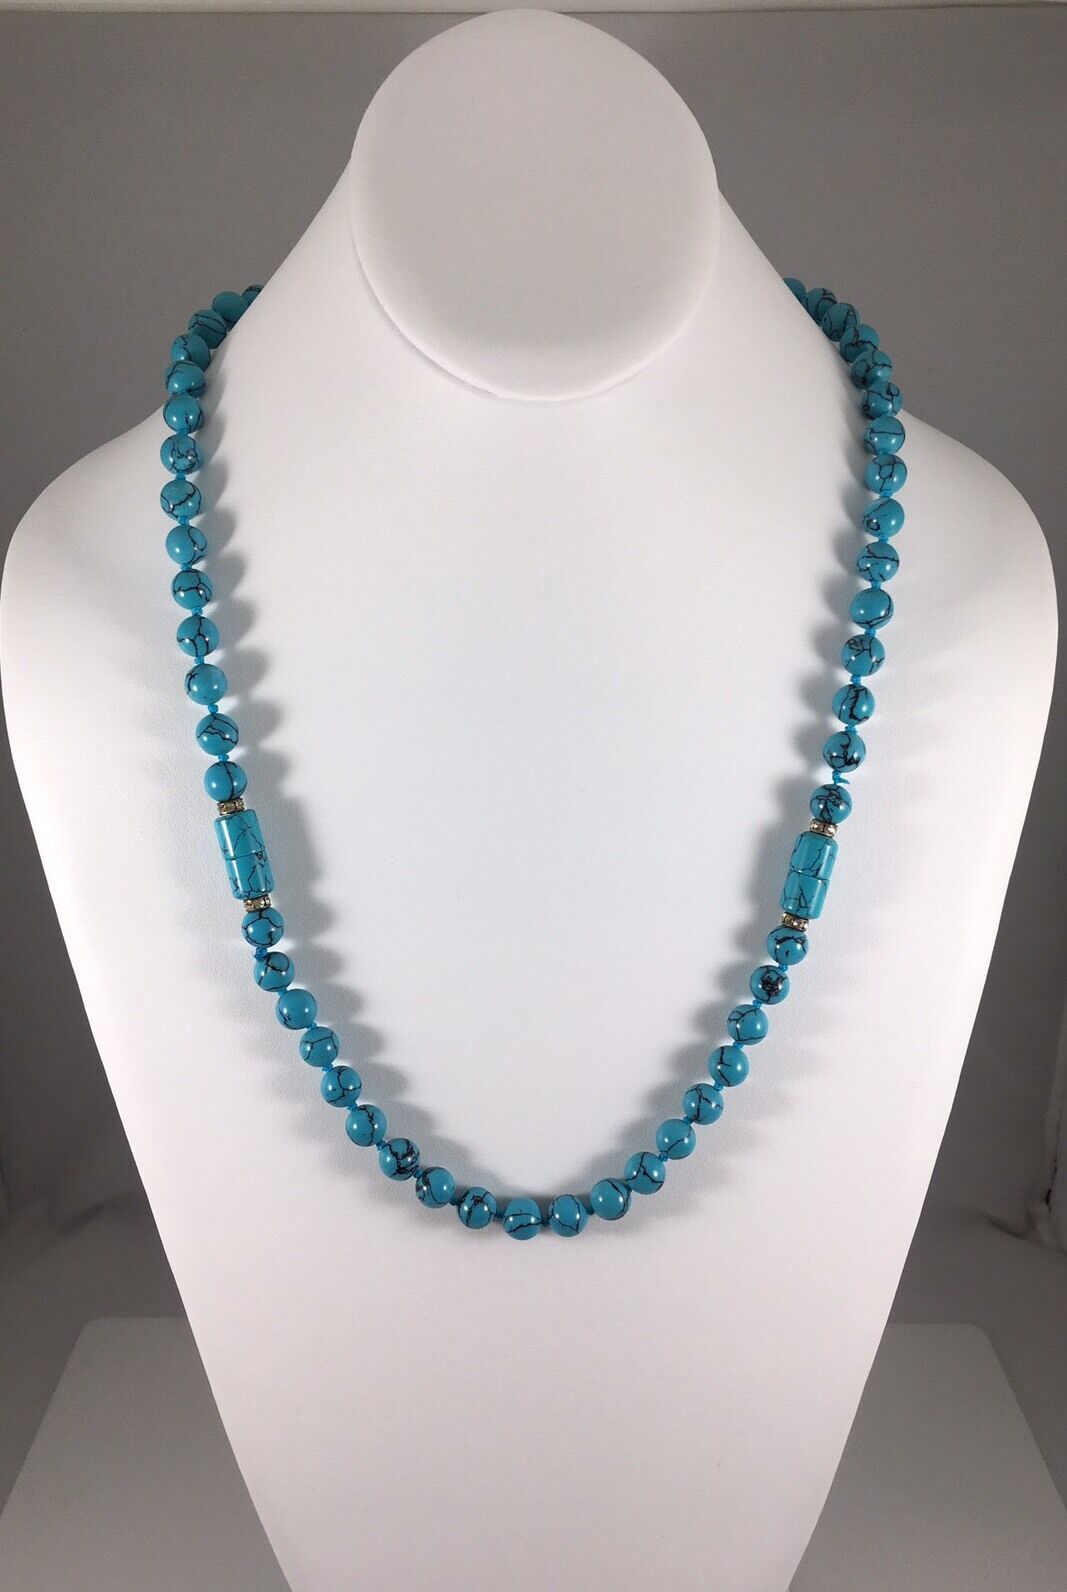 Gorgeous Beaded Turquoise Necklace and Bracelet Set, 16" & 7", Connected 23"